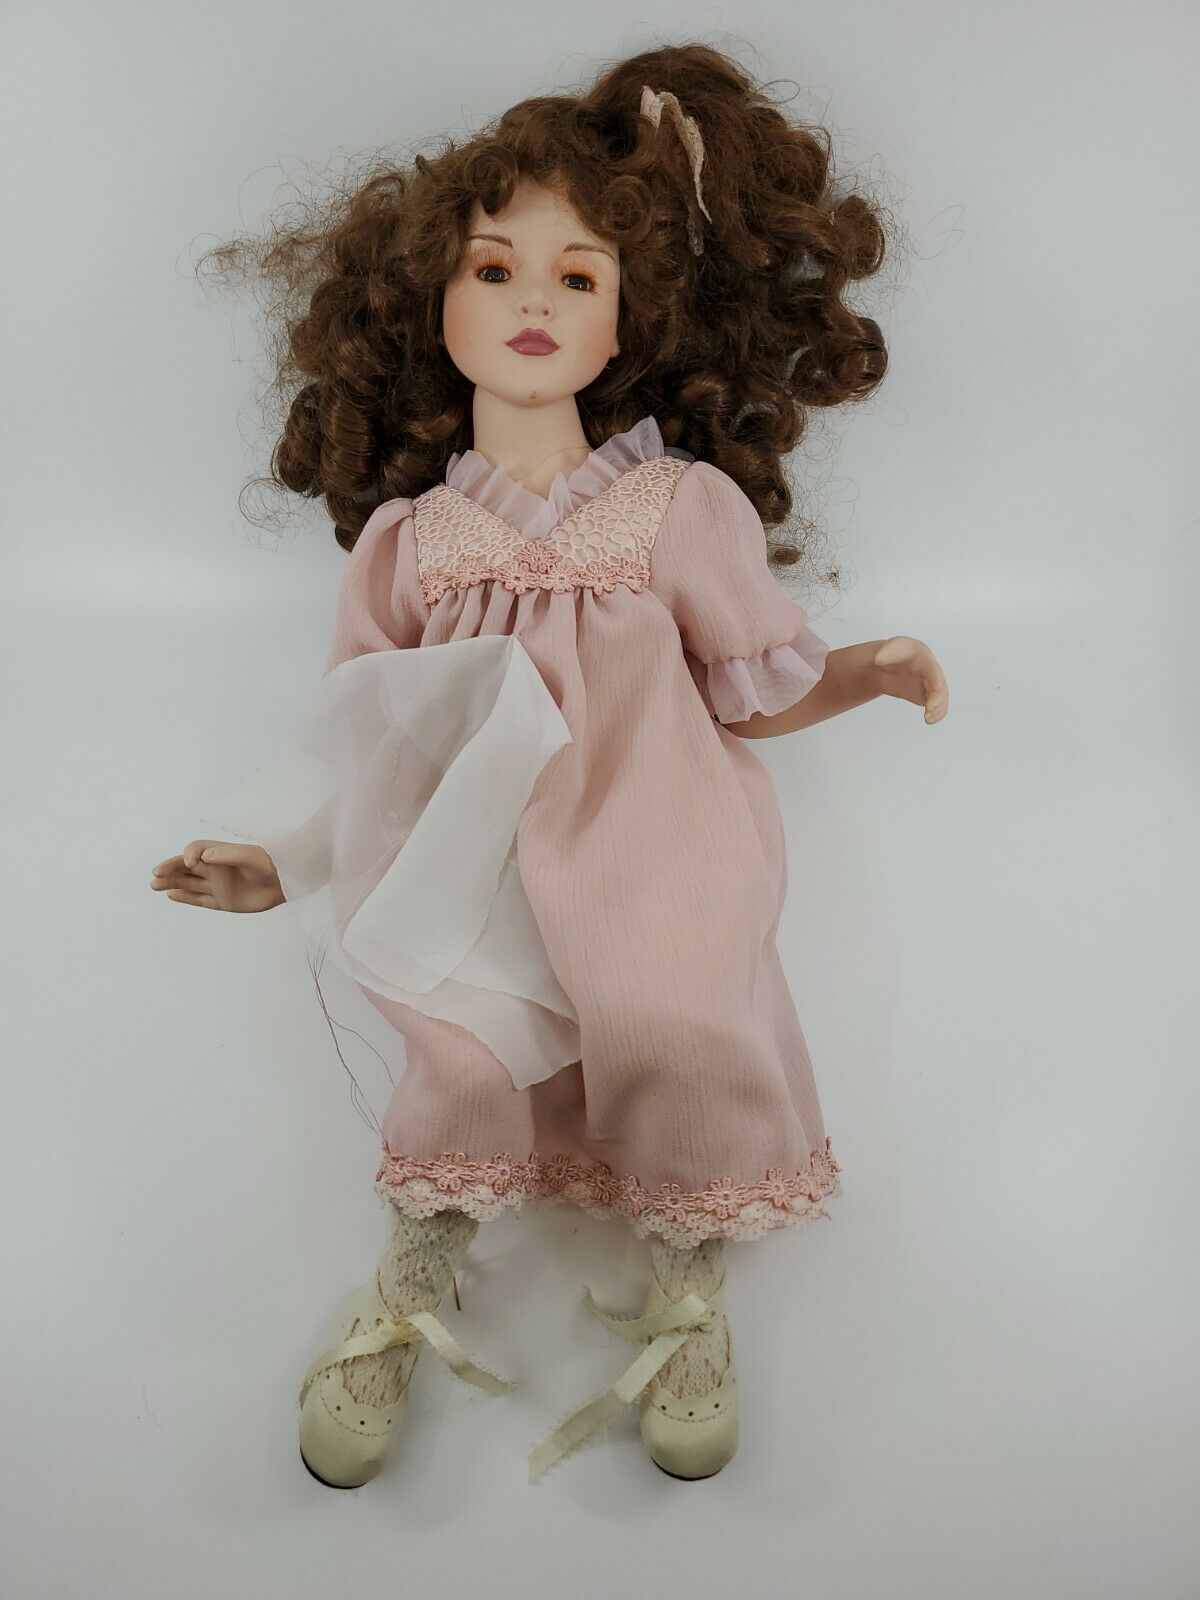 Show-stoppers Inc Collectible Porcelain Doll Lte 3500